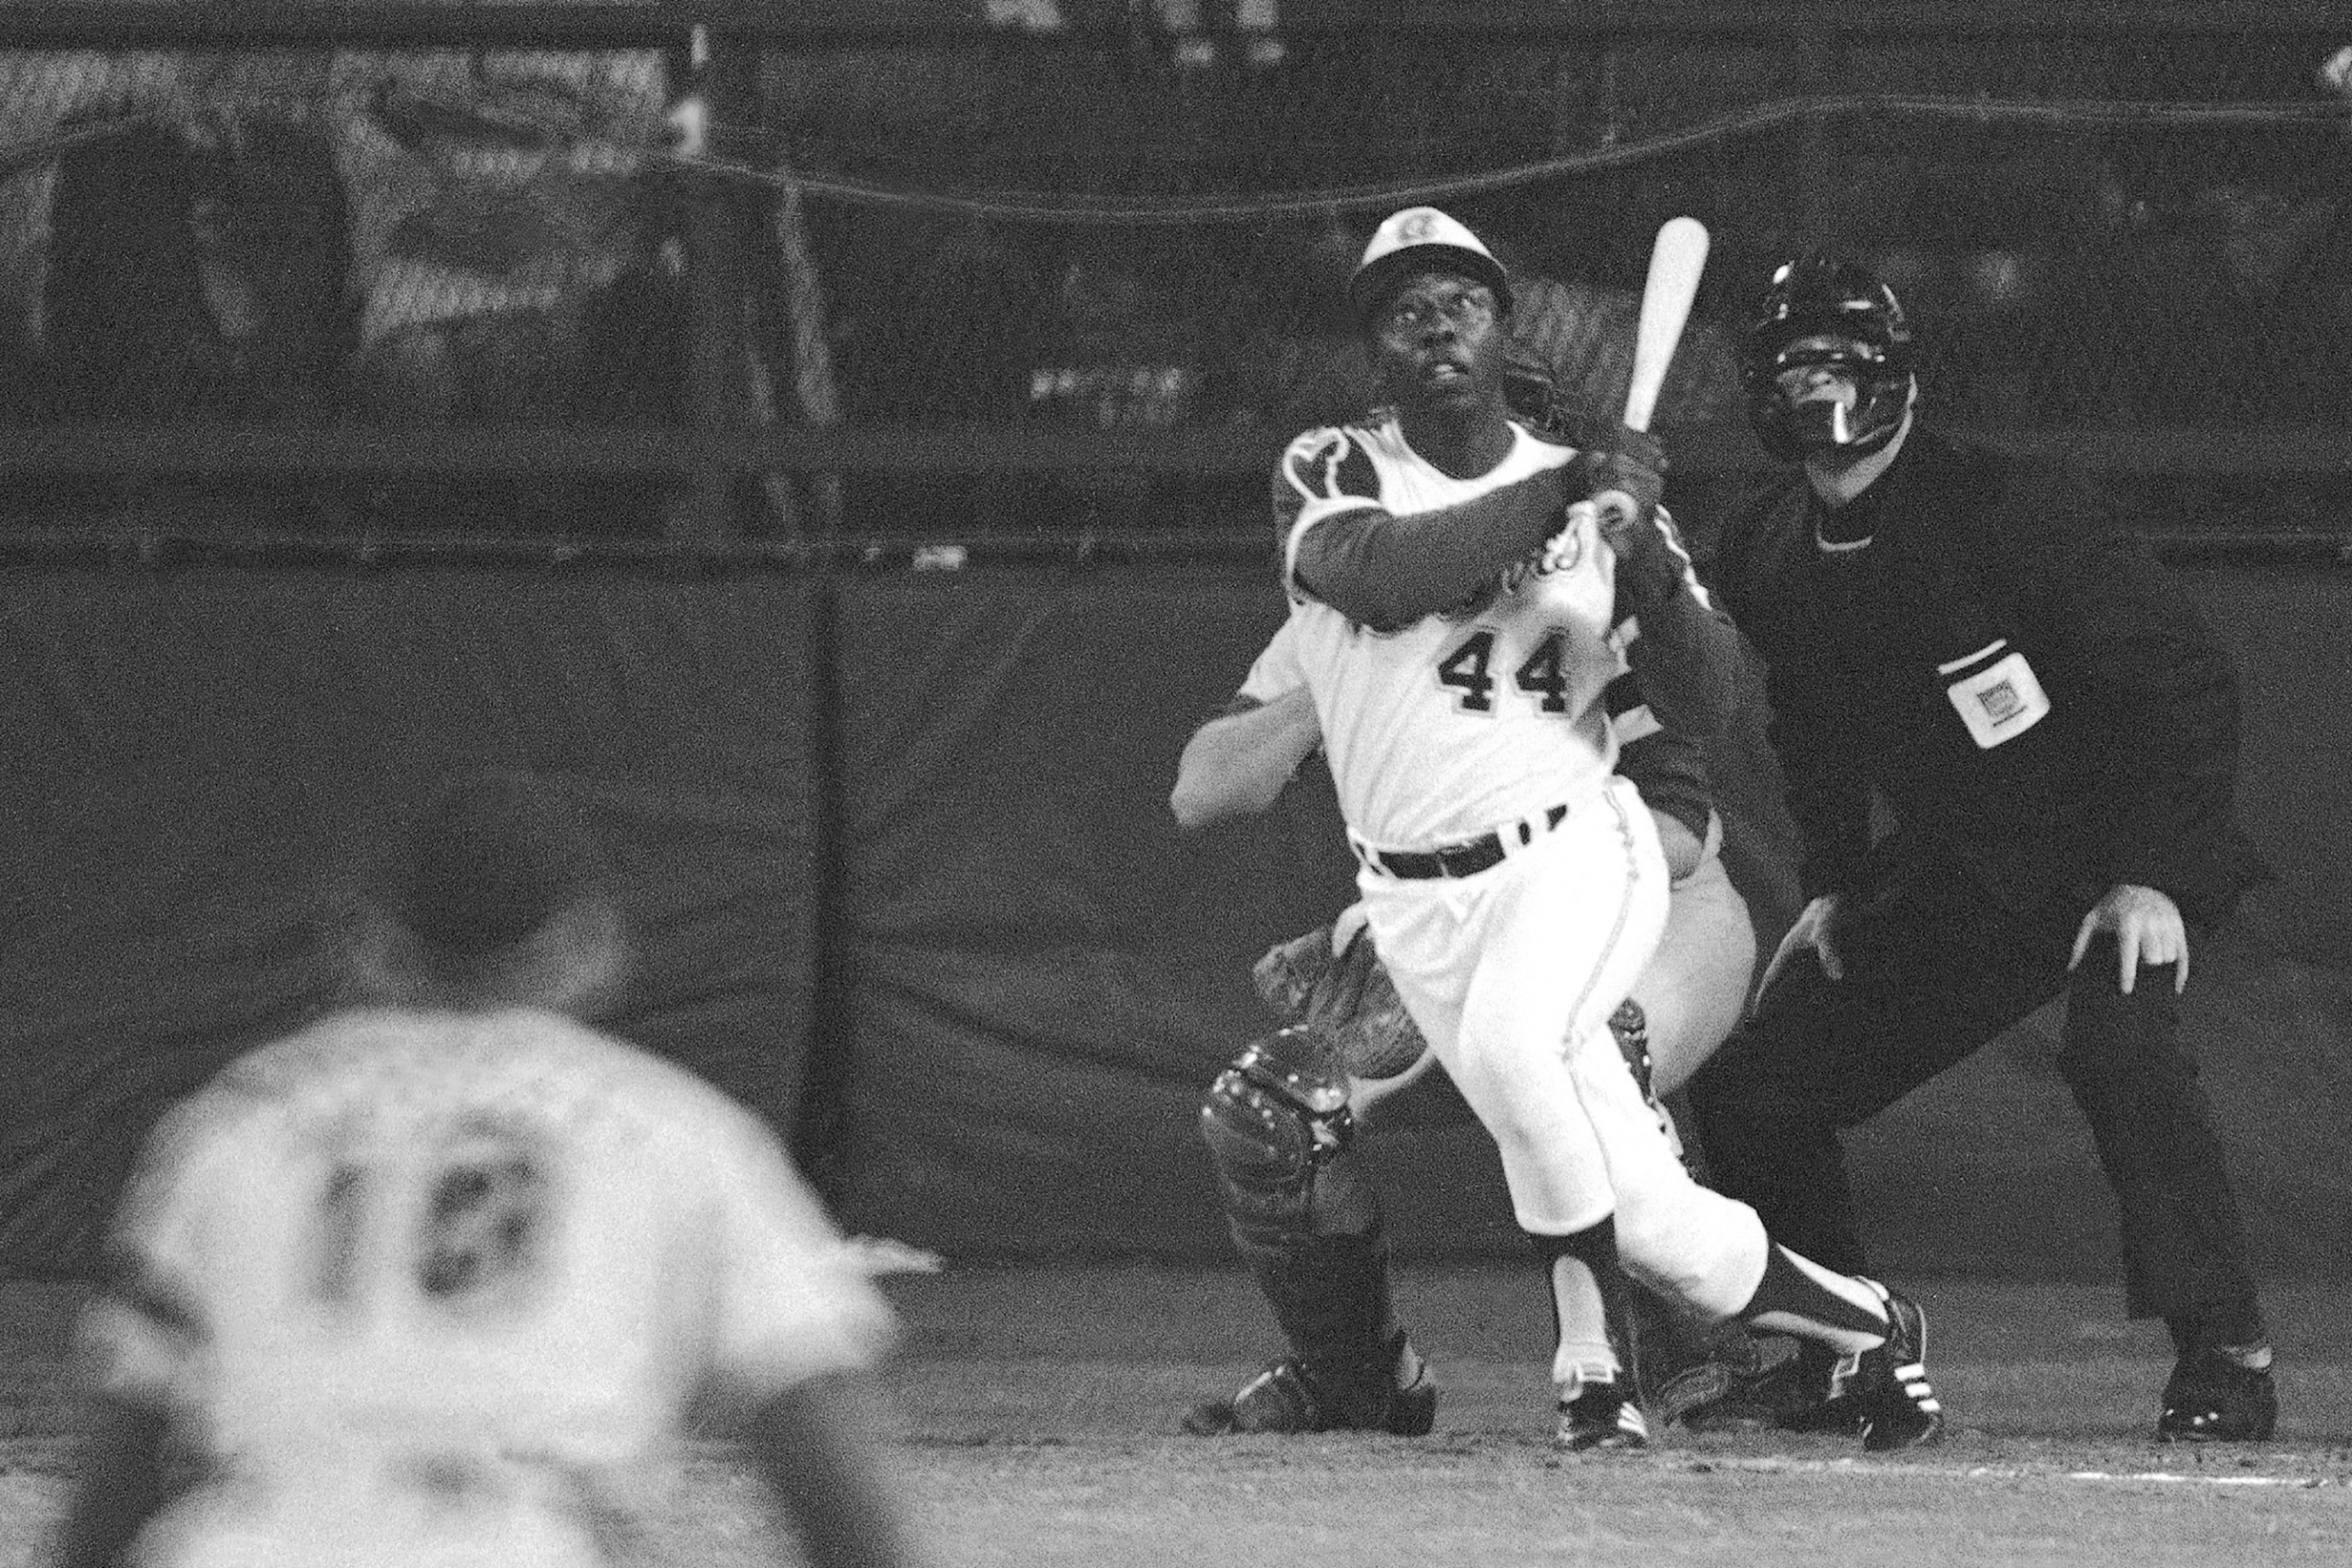 FILE - Atlanta Braves' Hank Aaron eyes the flight of the ball after hitting his 715th career homer in a game against the Los Angeles Dodgers in Atlanta, Ga., in this April 8, 1974 file photo. Dodgers pitcher Al Downing, catcher Joe Ferguson and umpire David Davidson look on. Hank Aaron, who endured racist threats with stoic dignity during his pursuit of Babe Ruth but went on to break the career home run record in the pre-steroids era, died early Friday, Jan. 22, 2021. He was 86. The Atlanta Braves said Aaron died peacefully in his sleep. No cause of death was given. (AP Photo/Harry Harrris, FIle)